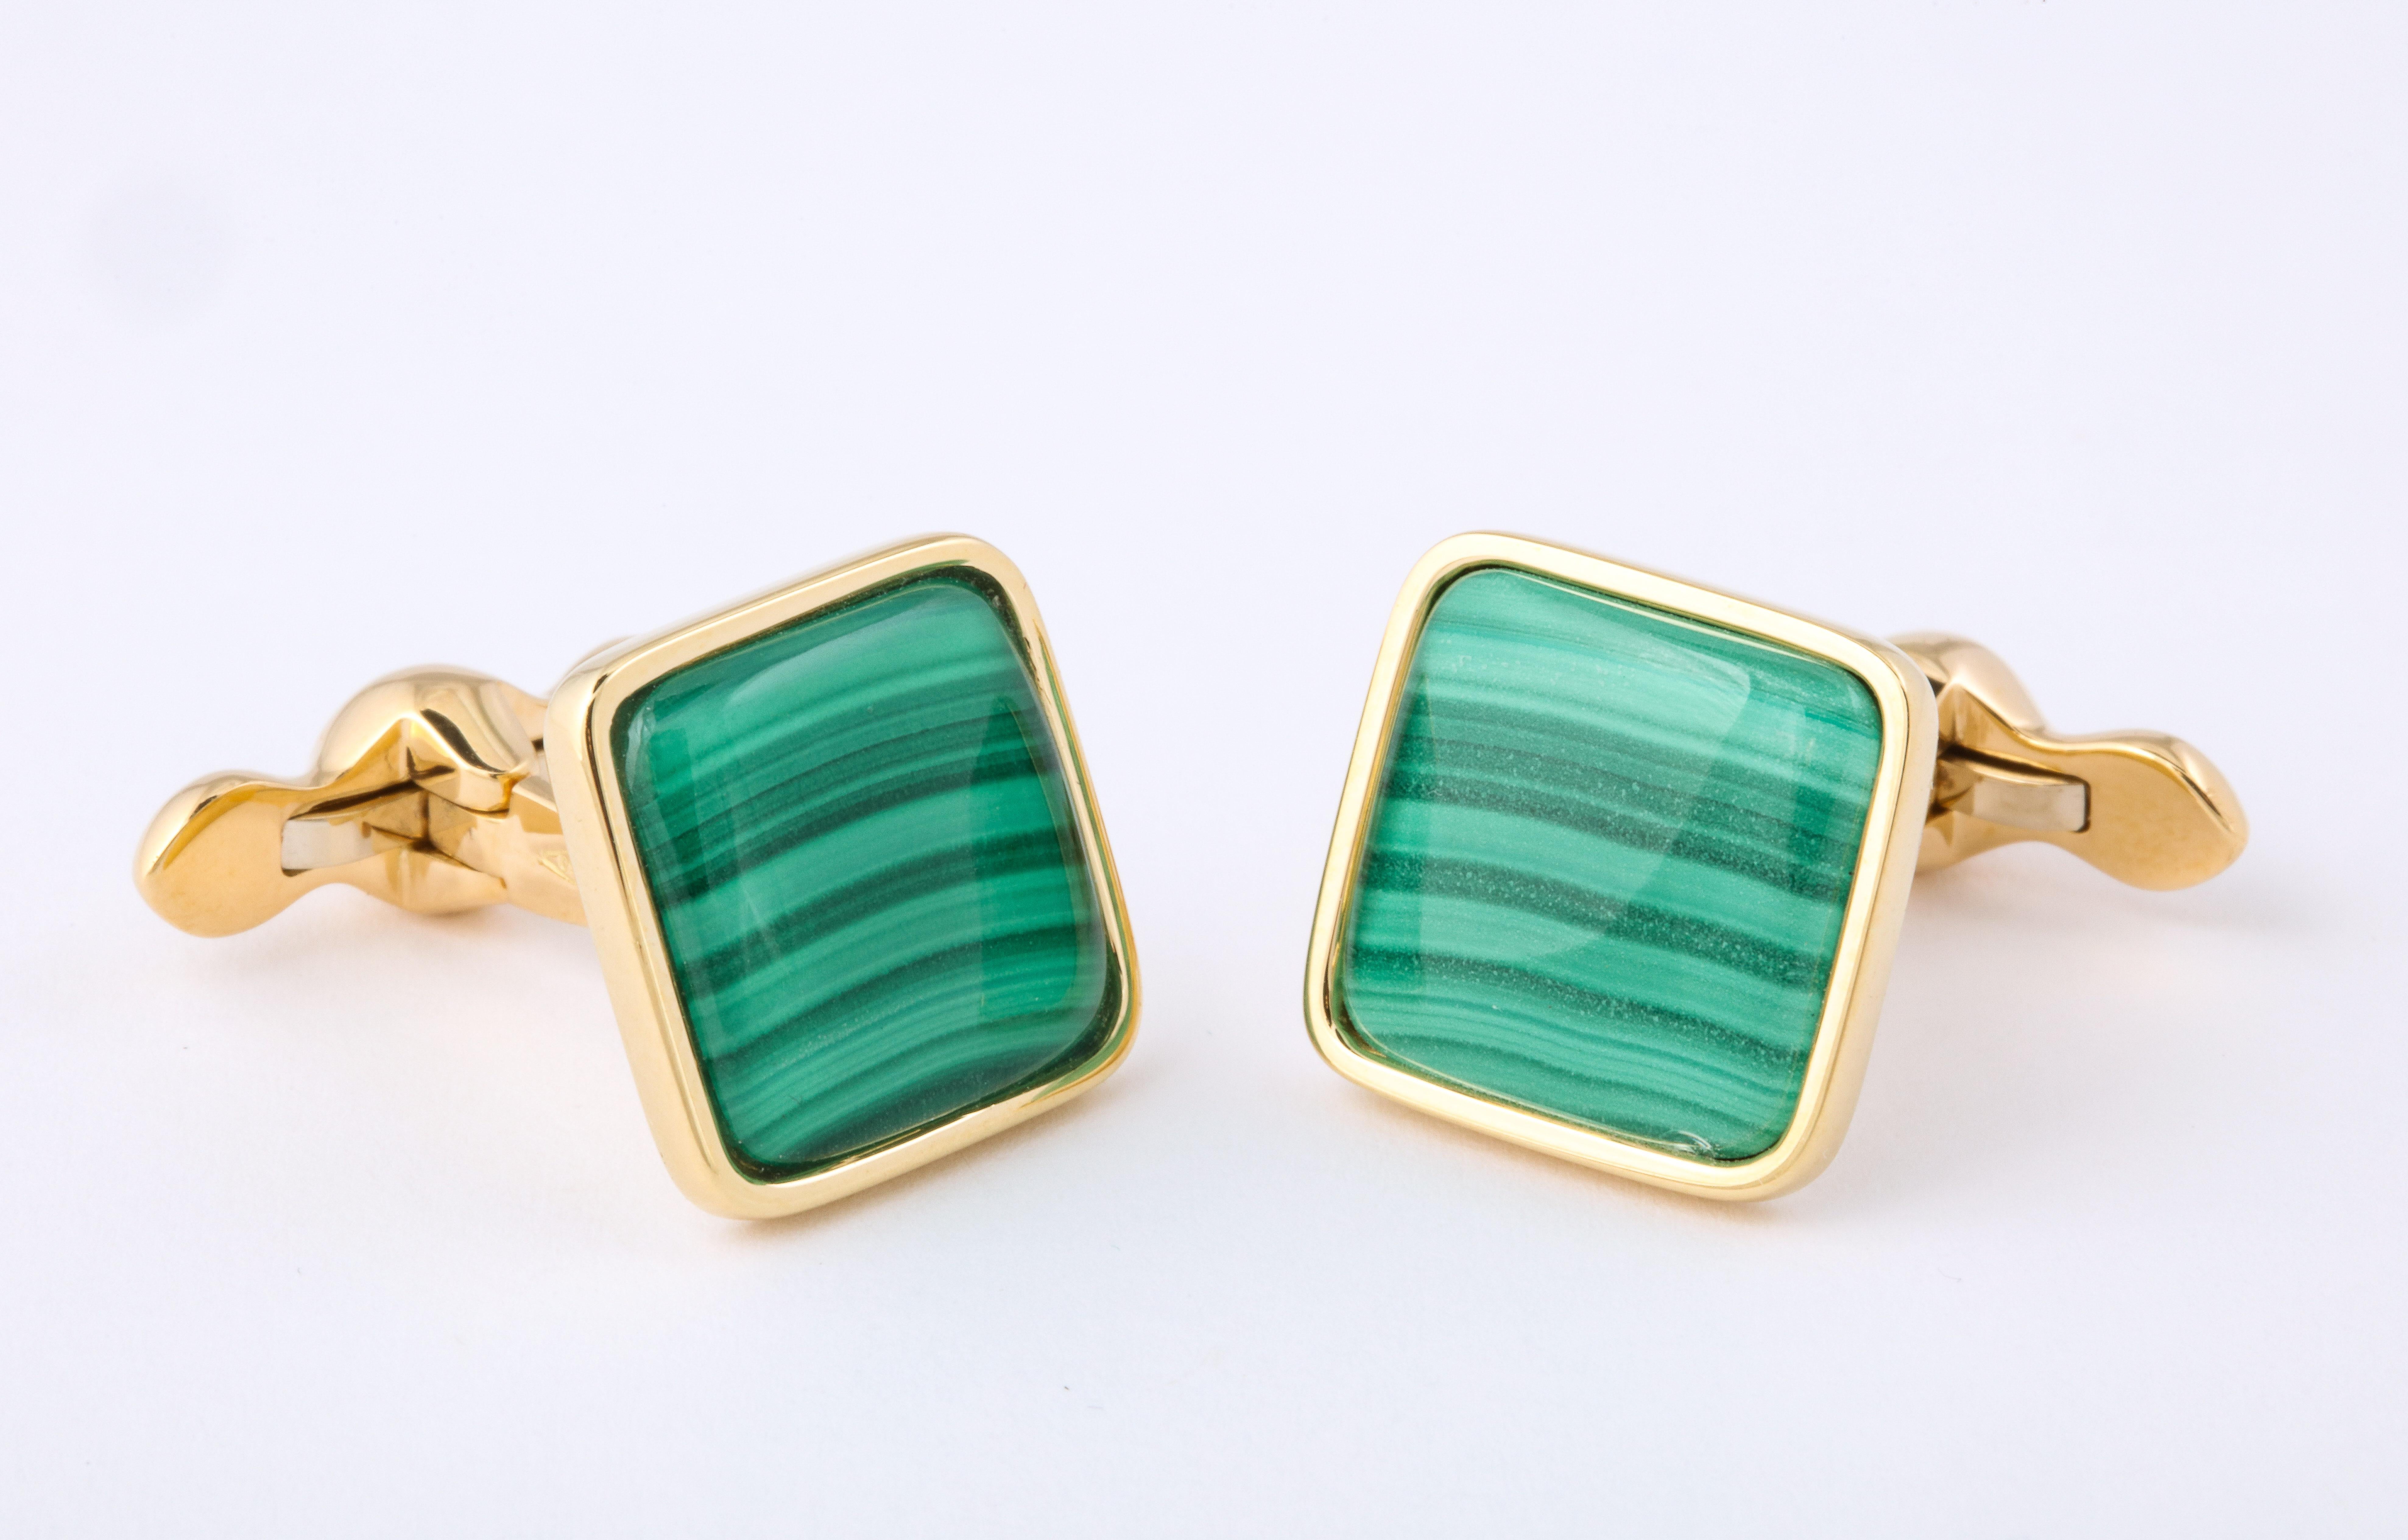 A slice of natural malachite is mounted beneath a rock crystal quartz cabochon, resulting in a slight magnified effect and elegant volume.  The spring backs are accented with complimentary green jade cabochons.  Unique and stylish, these will be